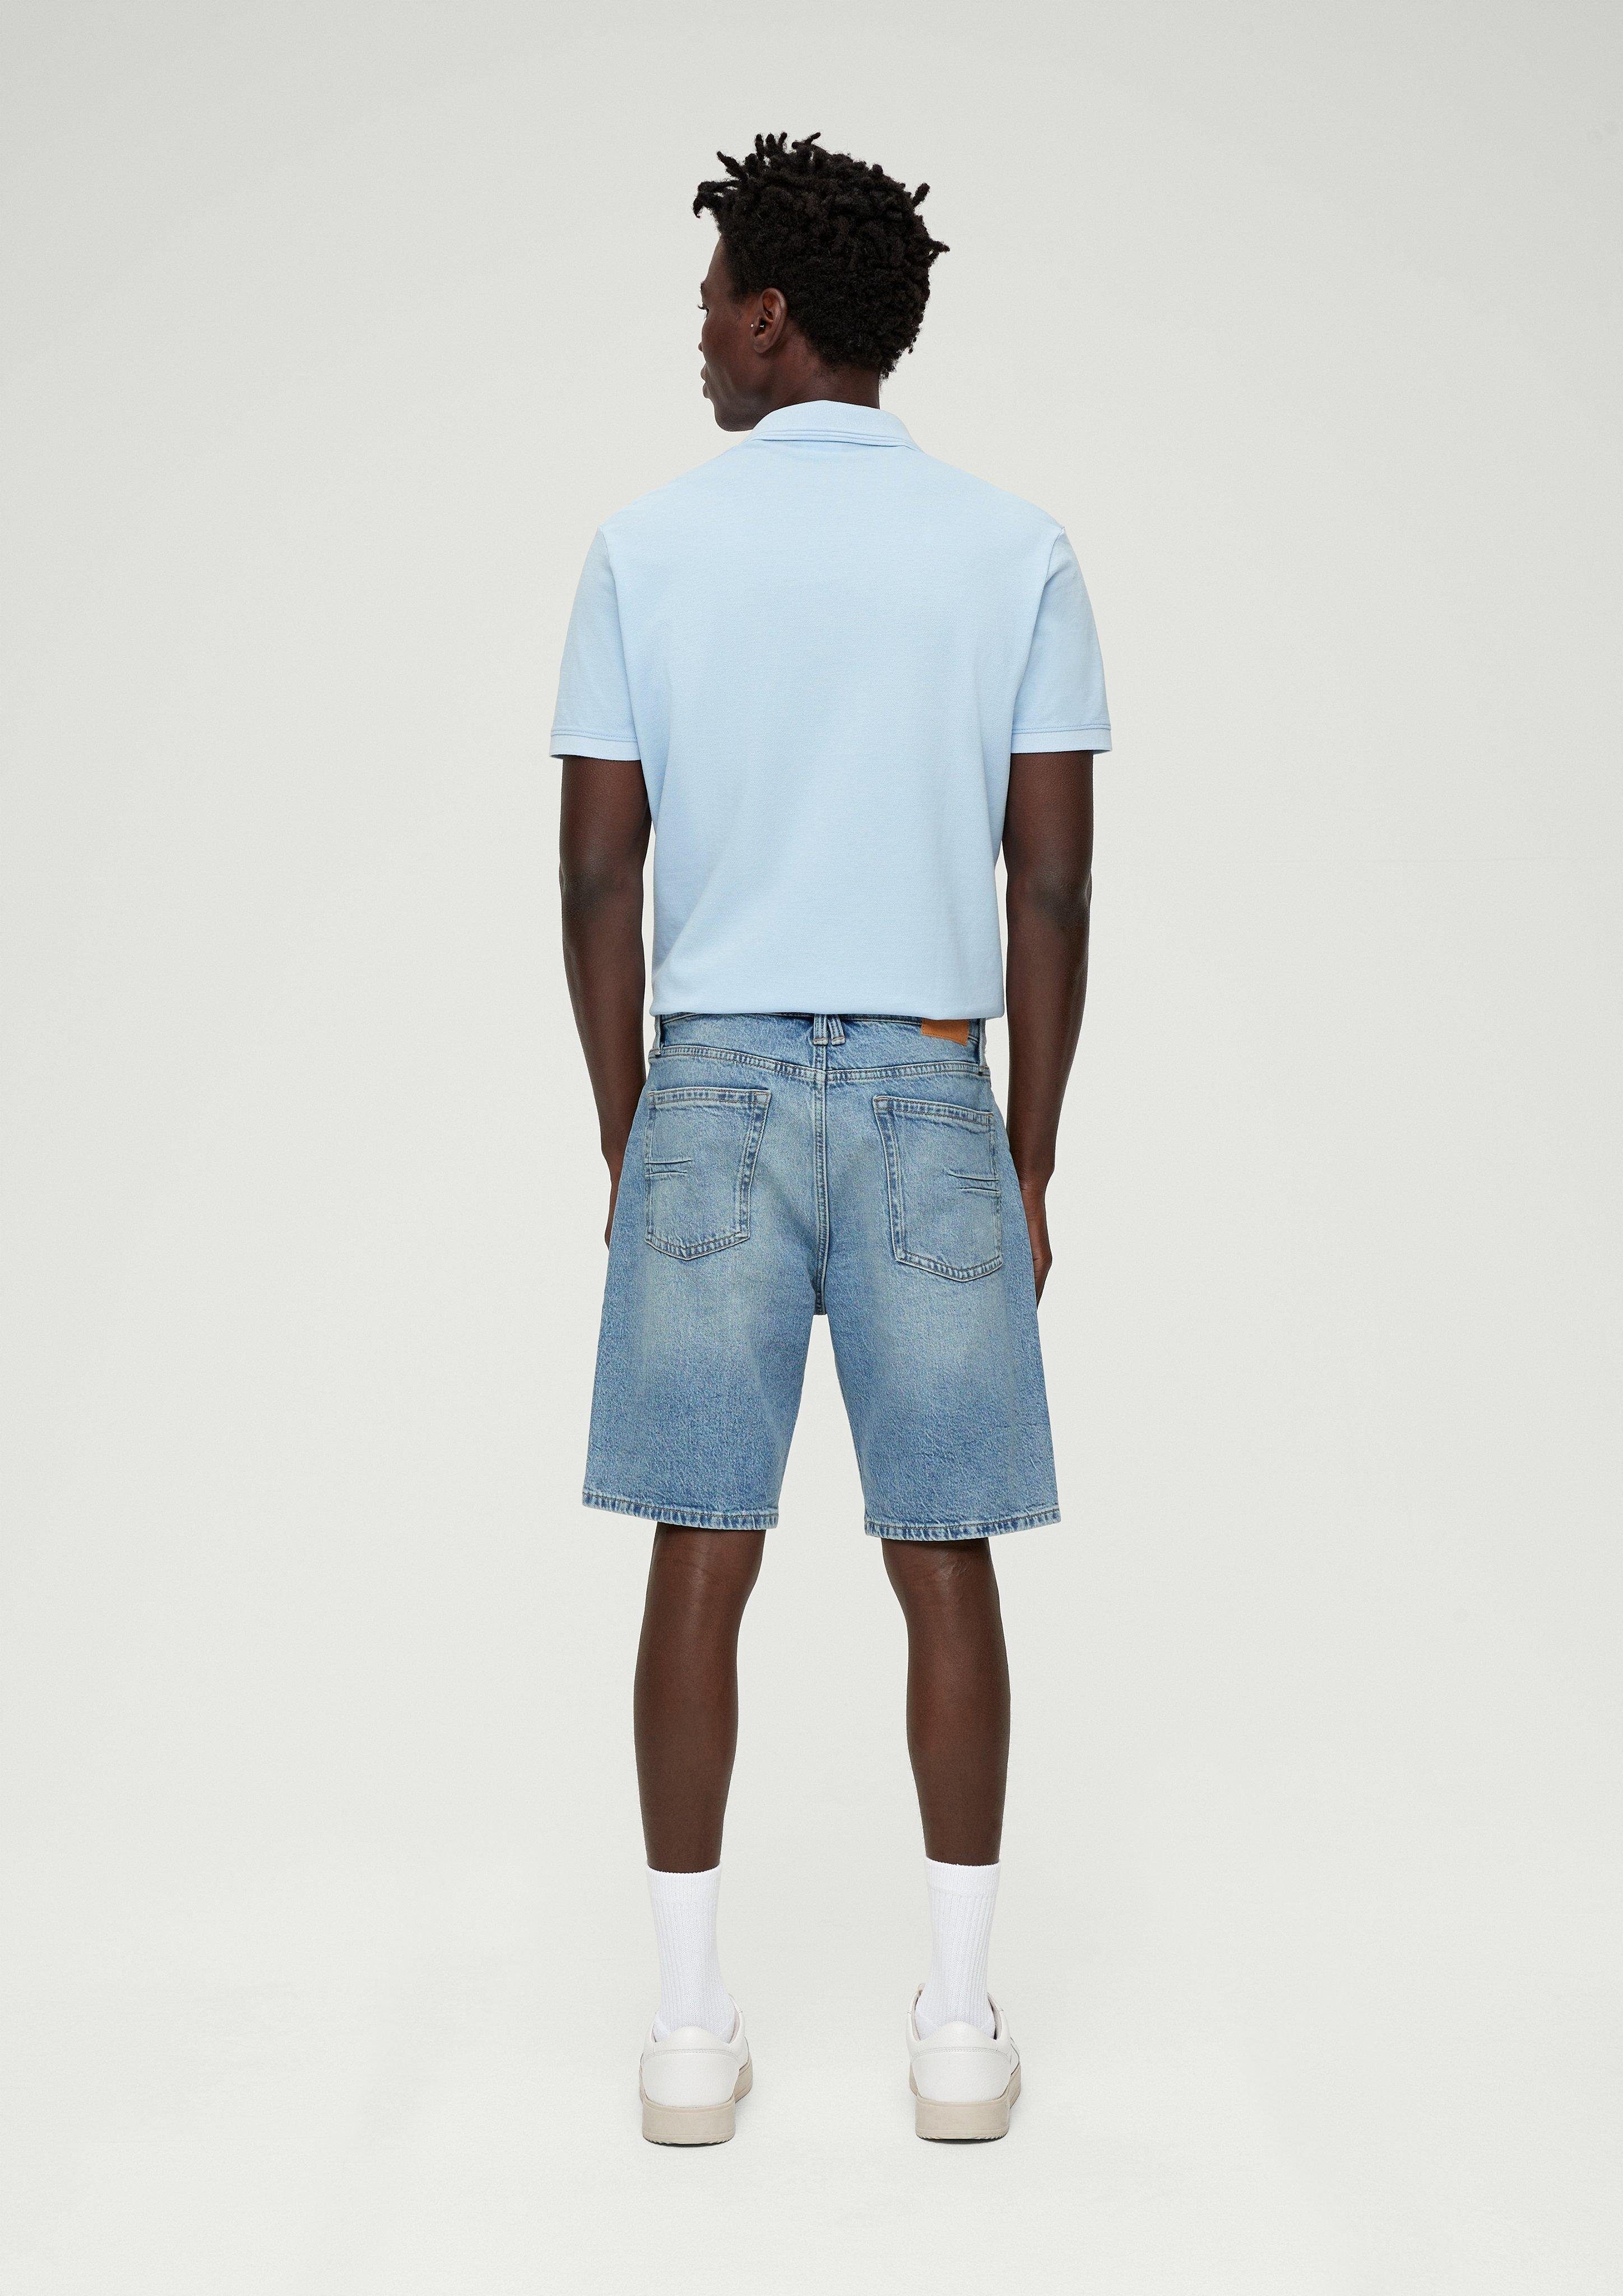 Regular Leg Rise / Jeansshorts Waschung Straight Fit / Jeans-Shorts / High s.Oliver